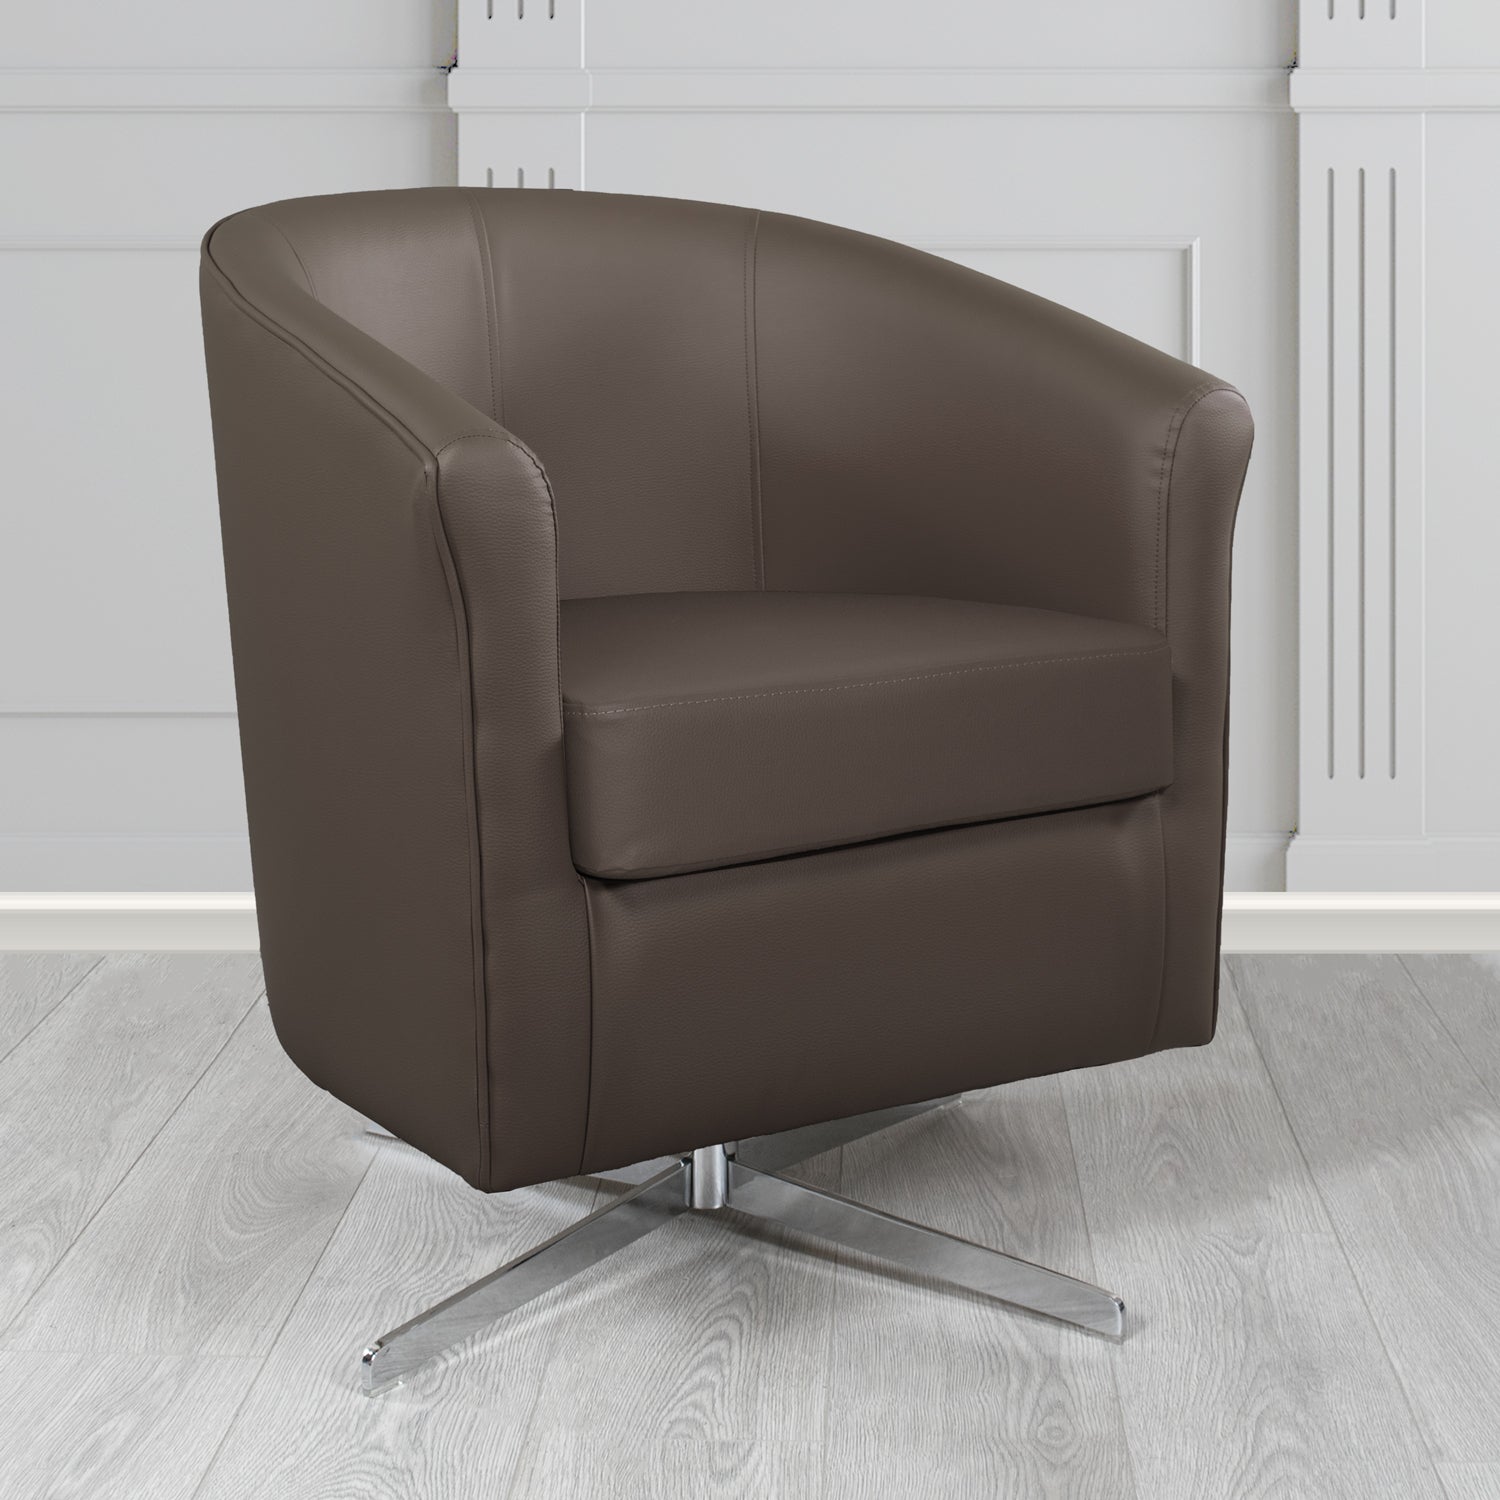 Cannes Swivel Tub Chair in Madrid Chocolate Faux Leather - The Tub Chair Shop